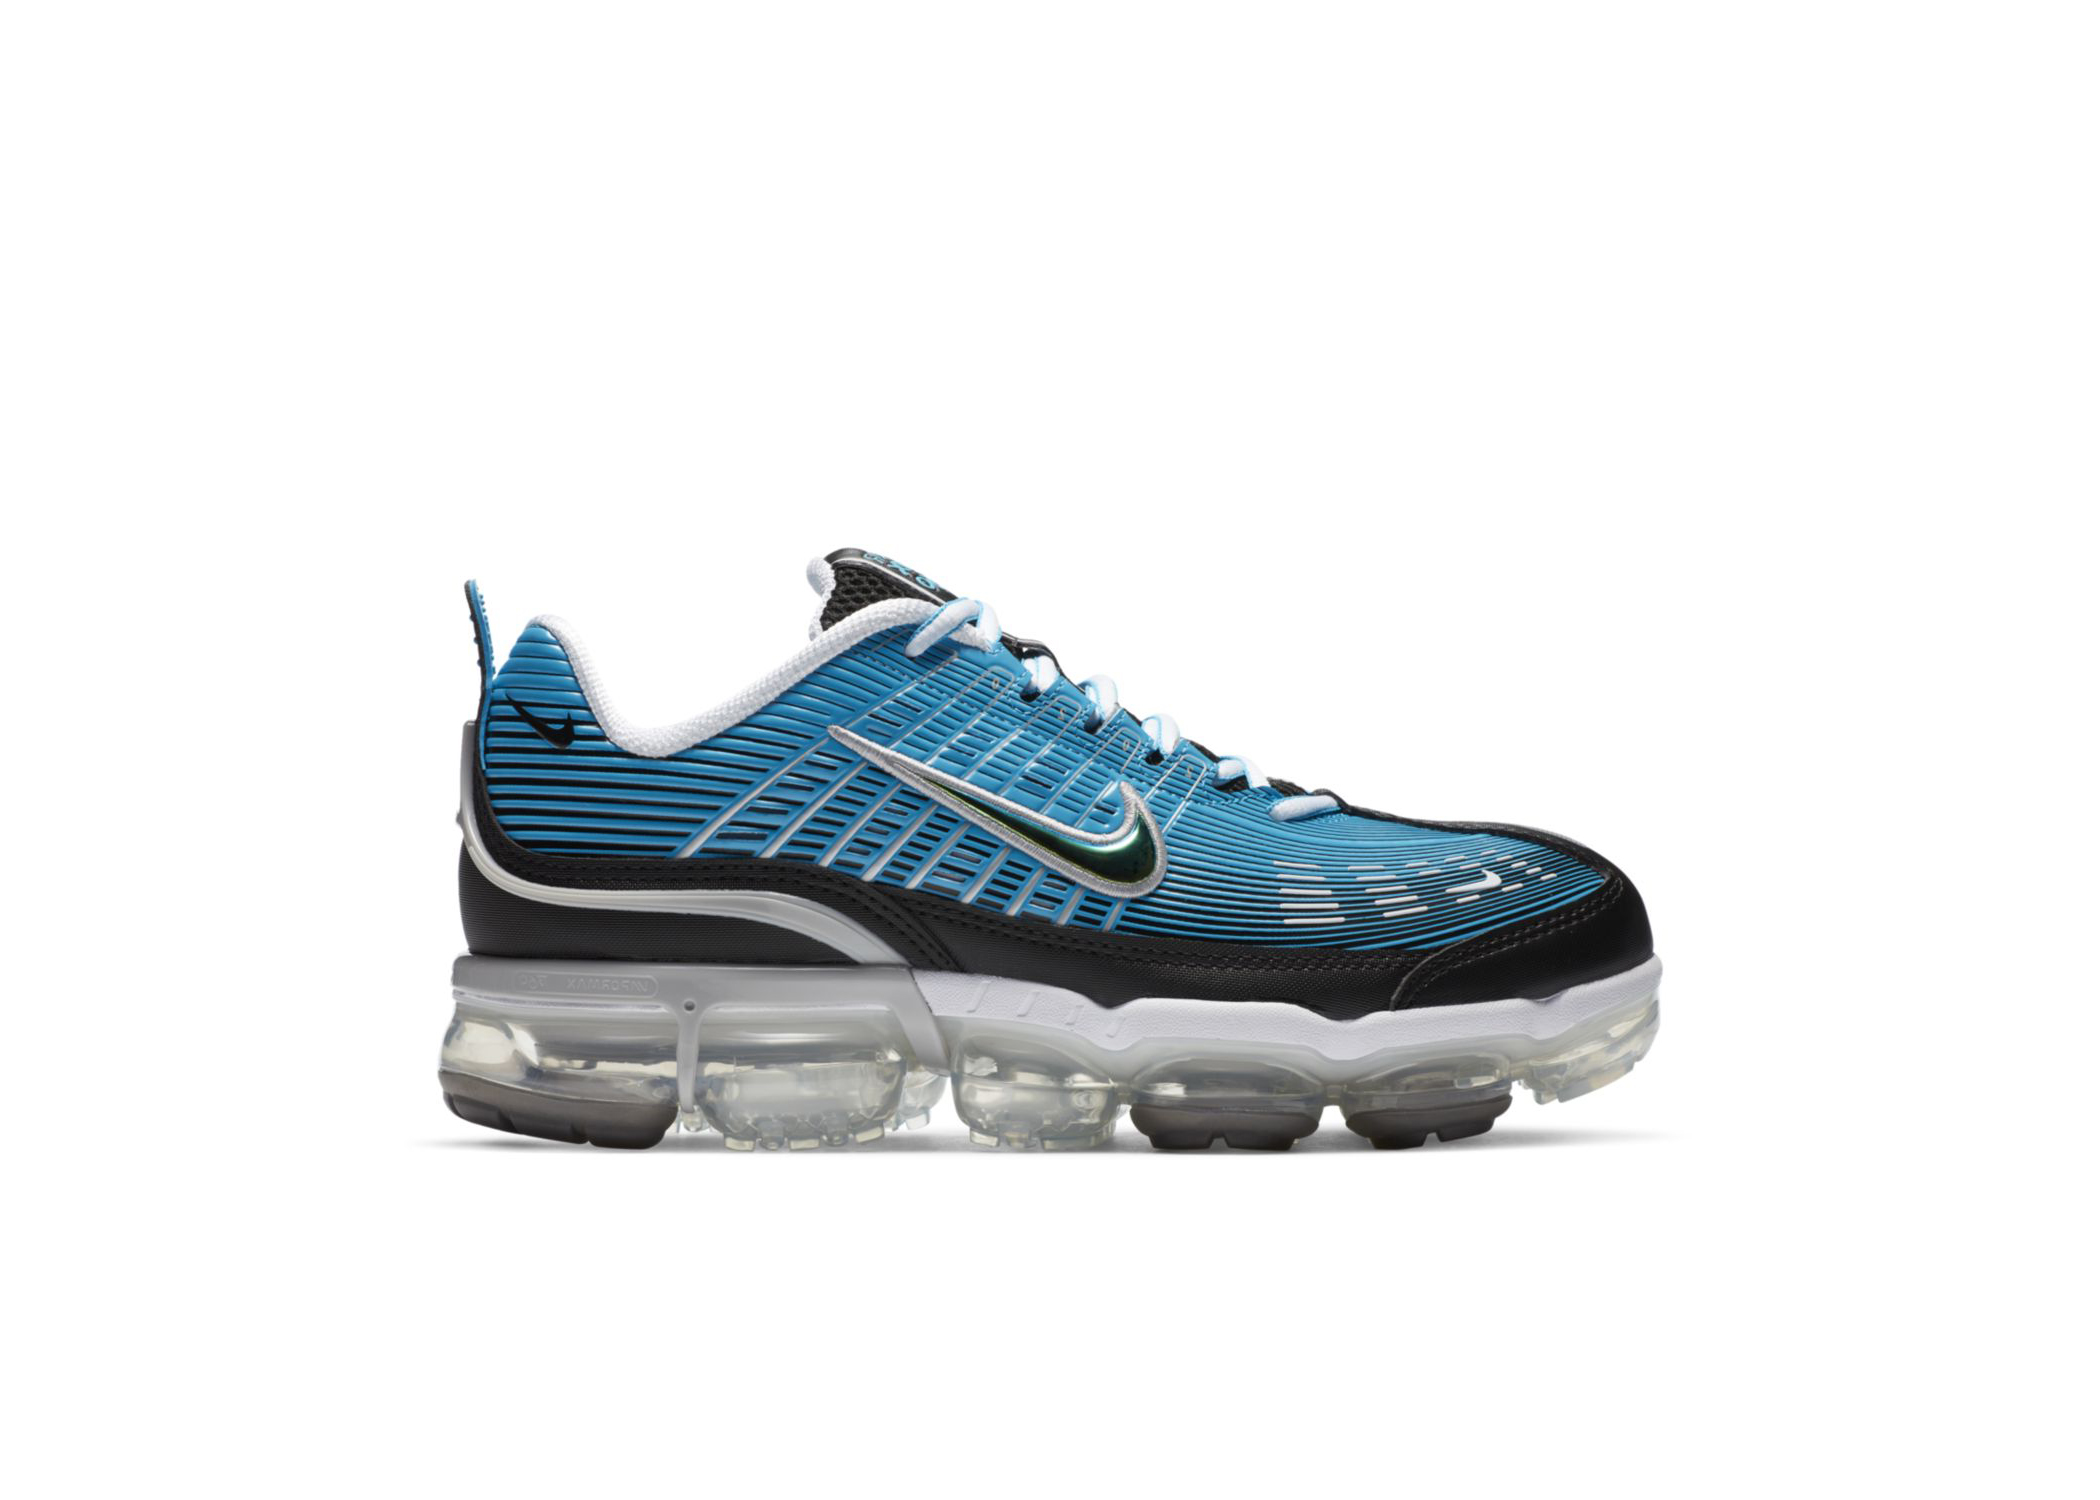 when did vapormax 360 come out